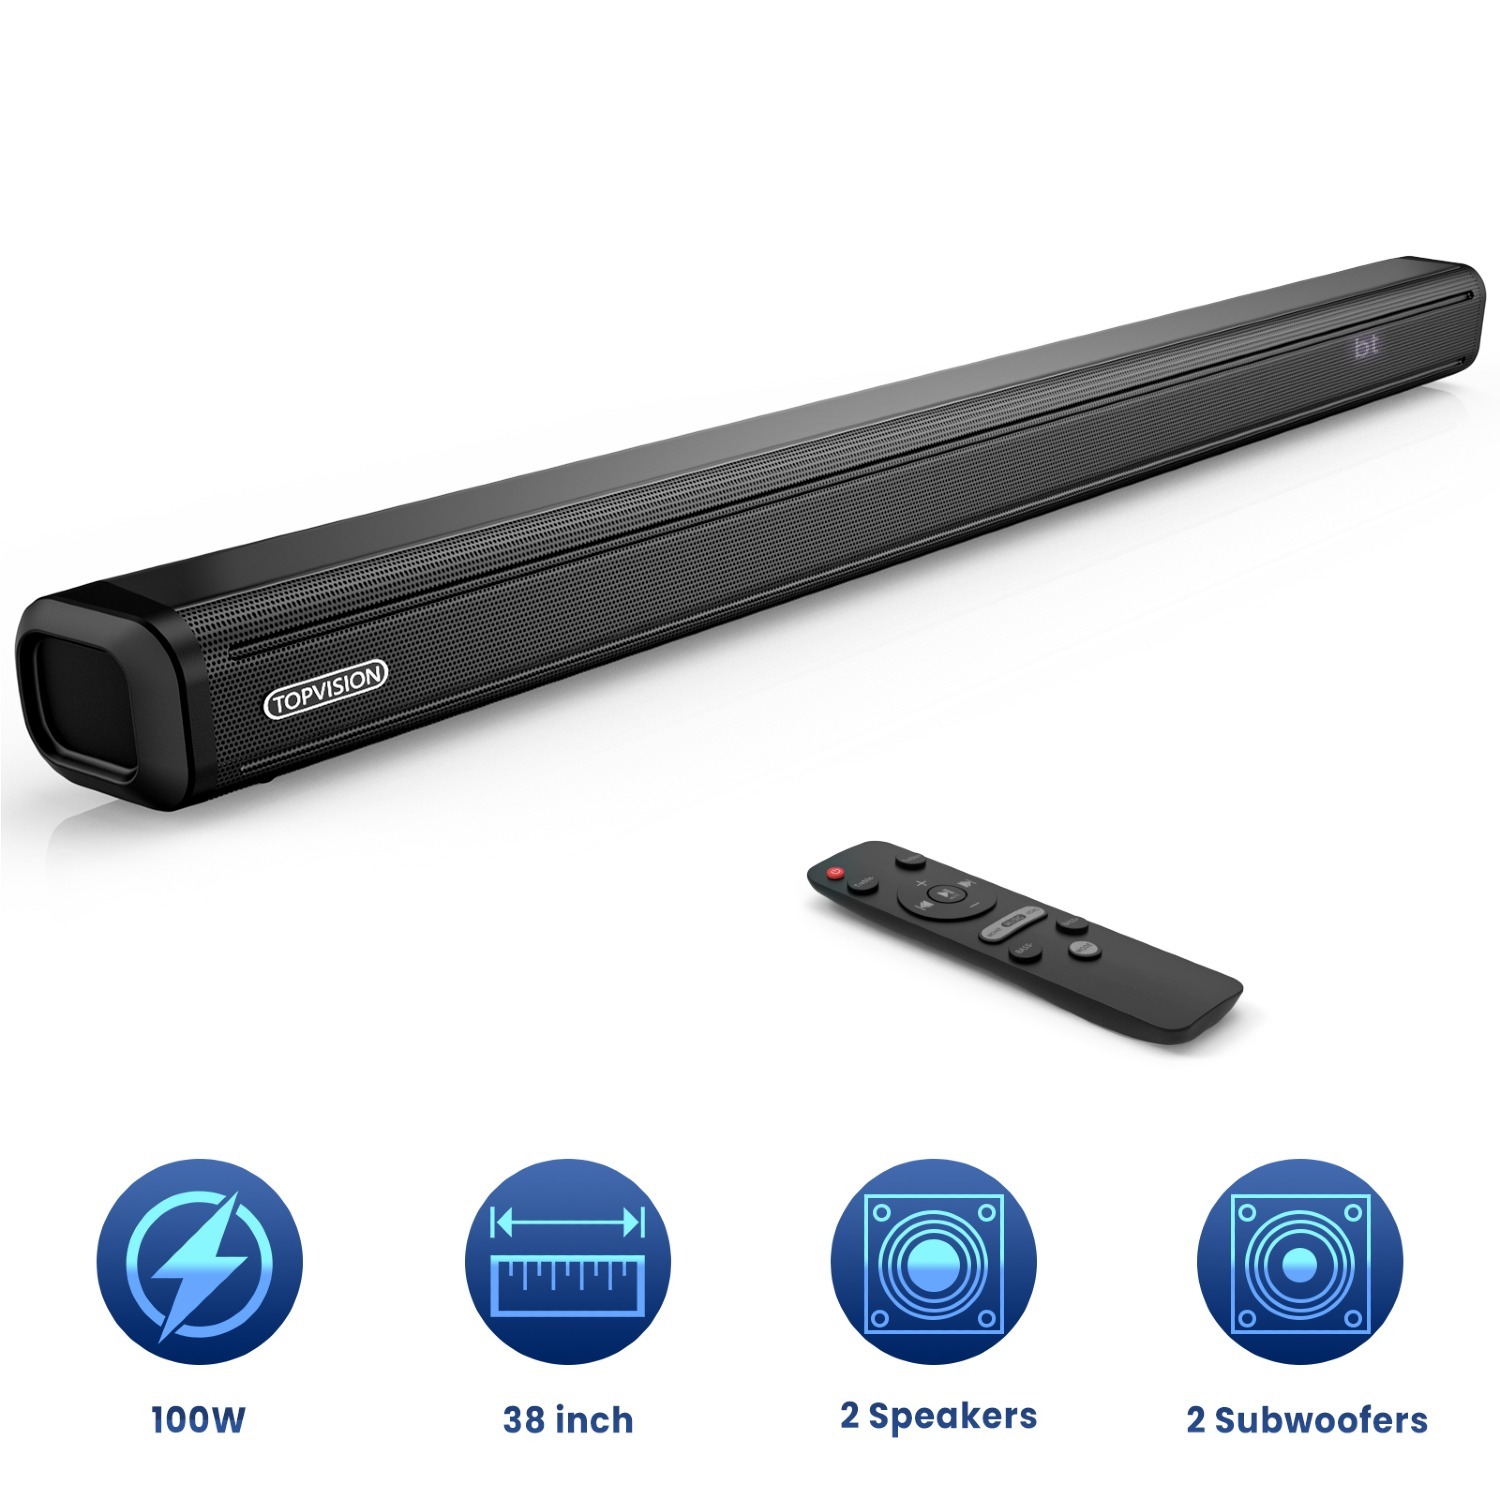 TOPVISION 38" TV Soundbar 2.2ch Built-in Dual Subwoofers $40 + Free Shipping